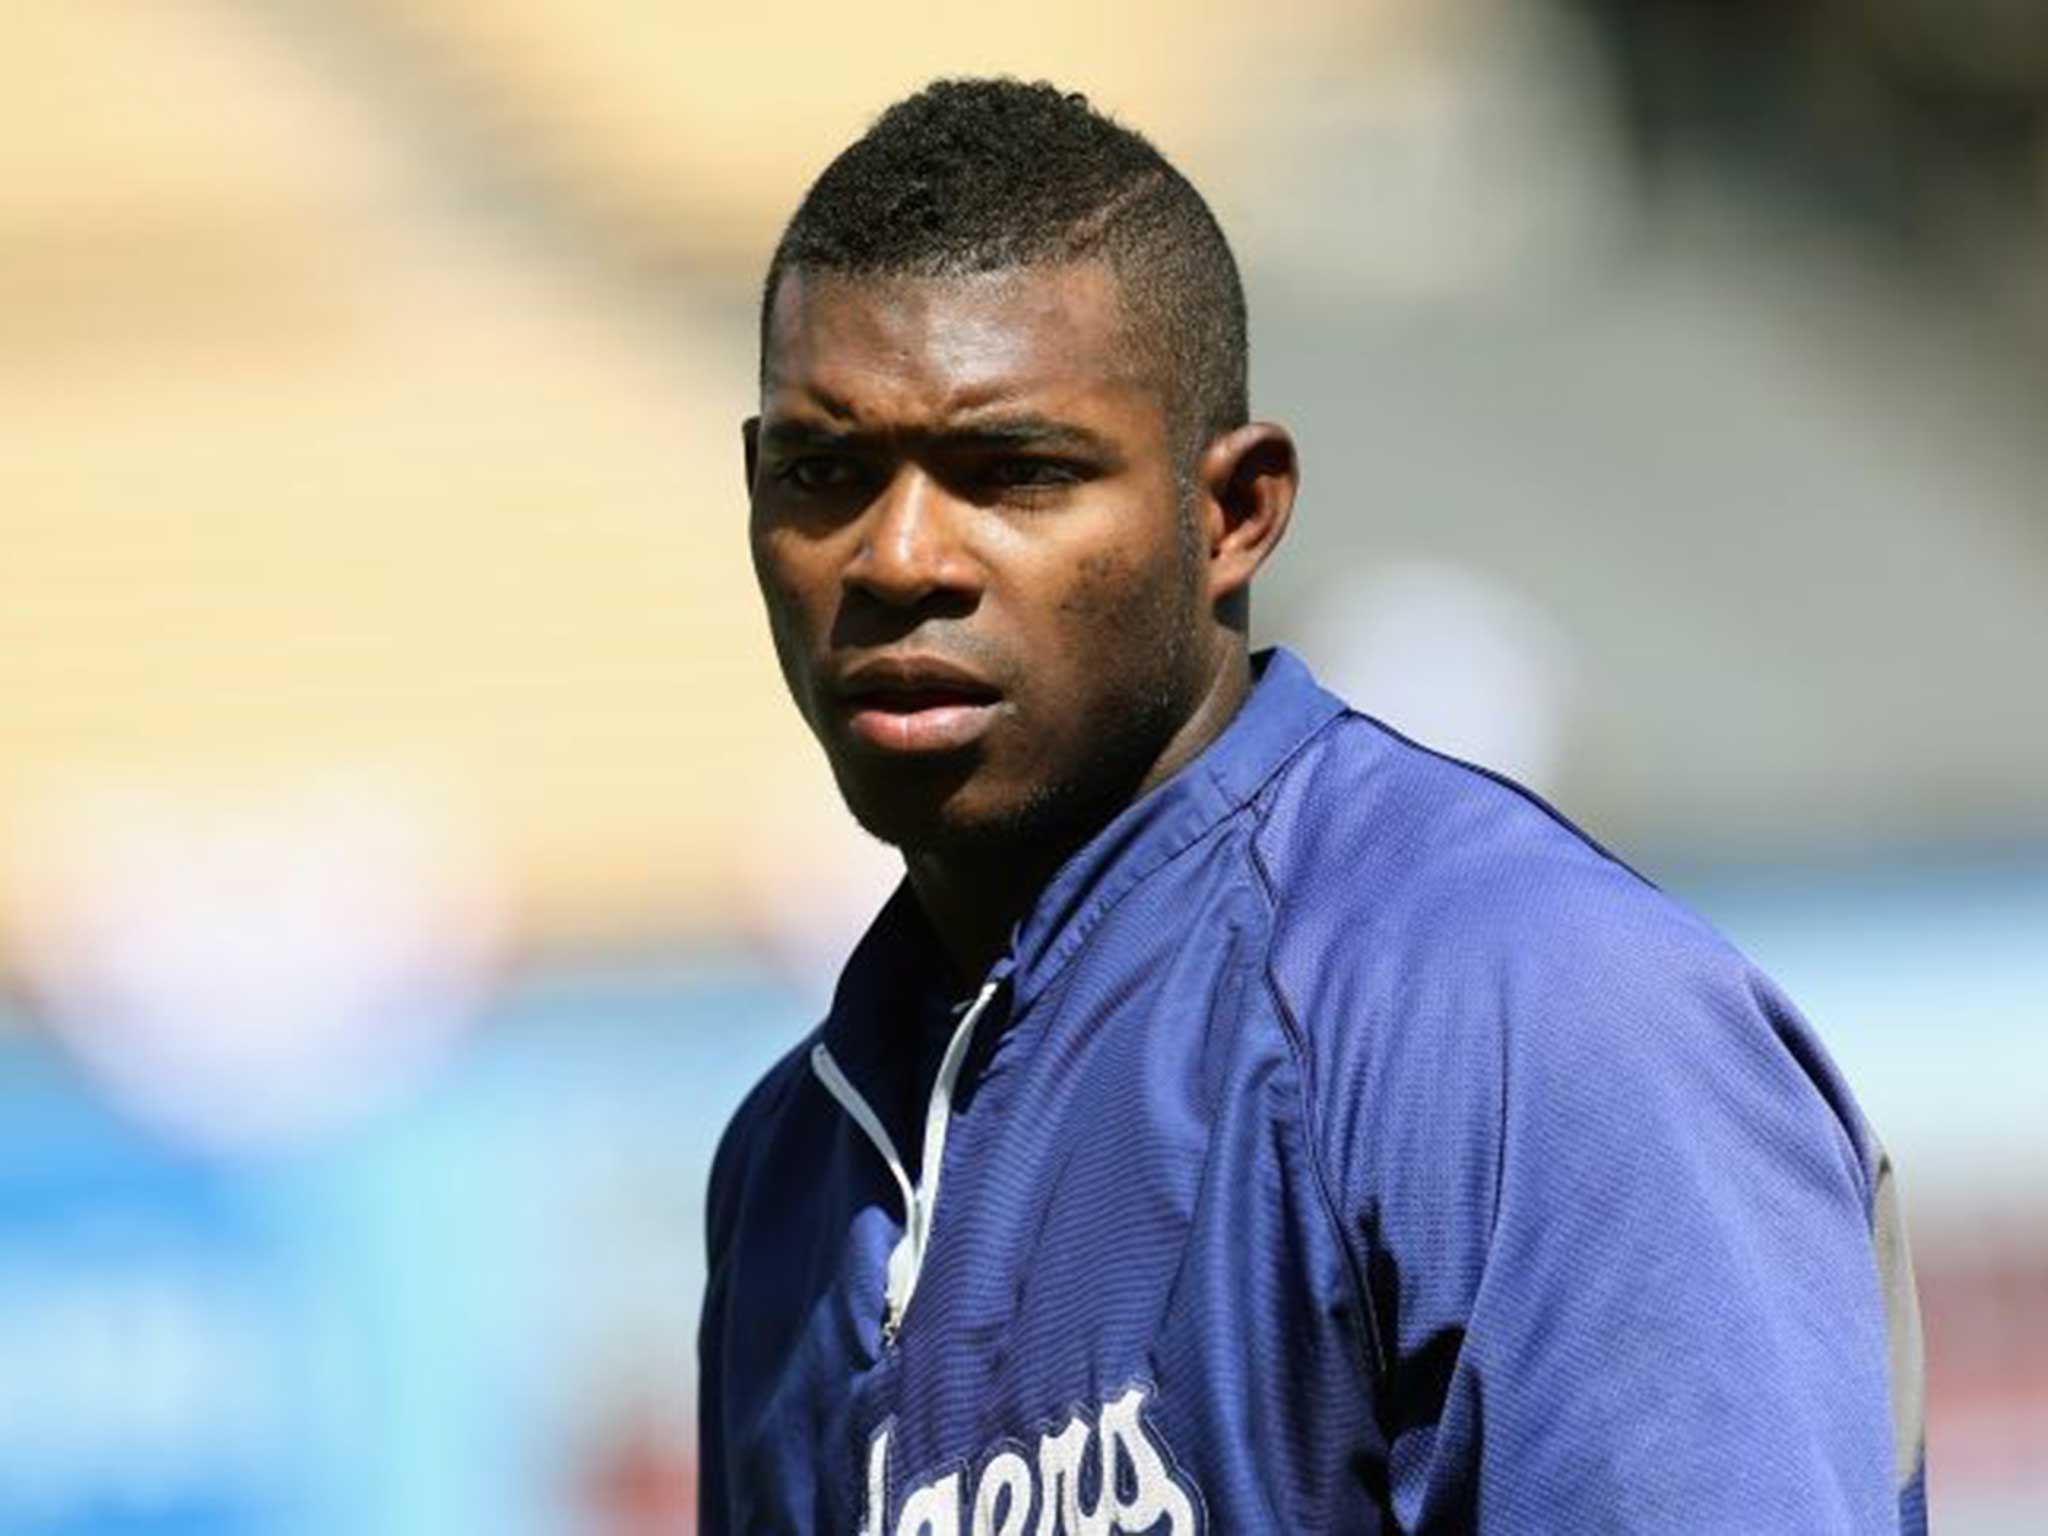 Yasiel Puig signed a $42m contract with the LA team before leaving Mexico